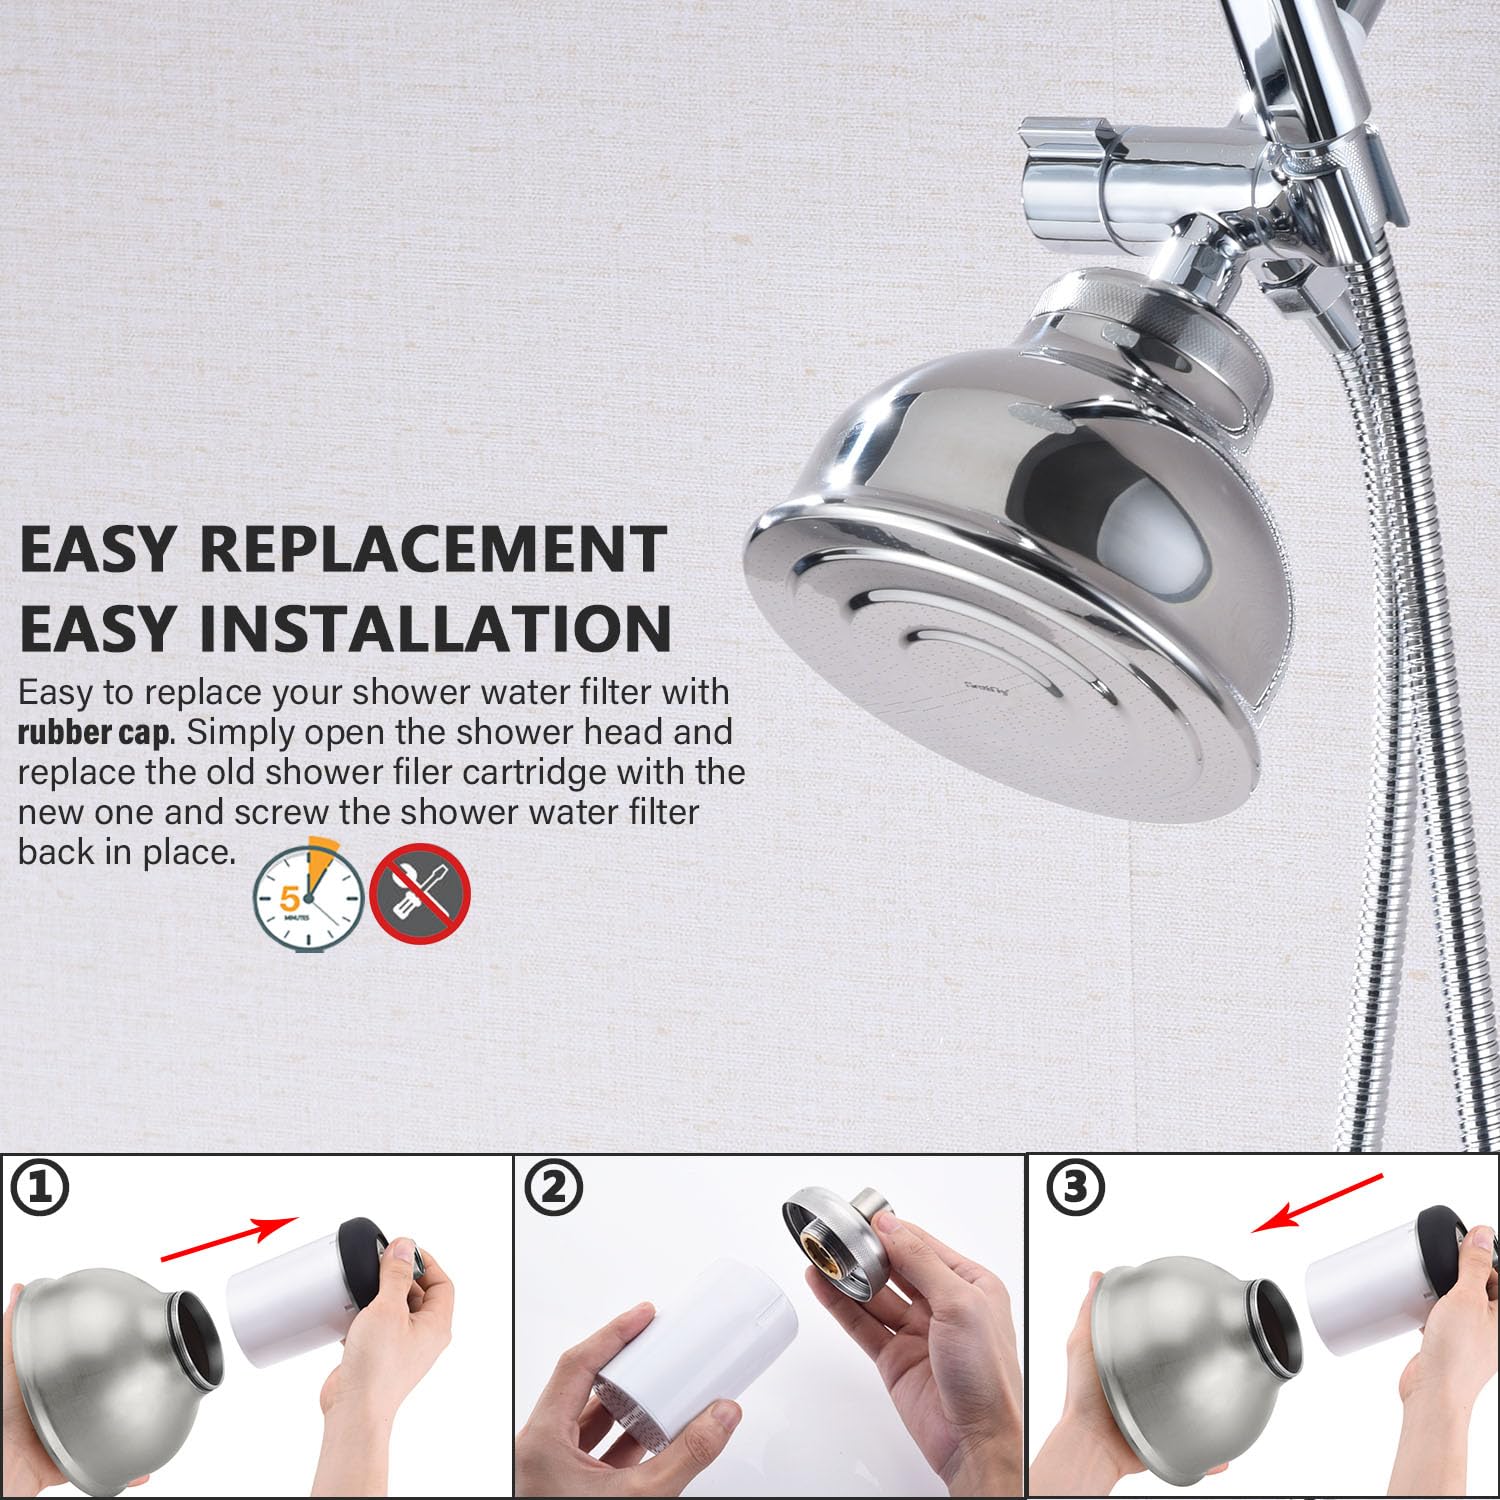 SonTiy Filtered Shower Head, Built-in Shower Filter Mulit Stage Hard Water Shower Head Filter to Reduce Dry Itchy Skin, Dandruff - High Output Rainfall Showerhead - Stainless Steel - Chrome